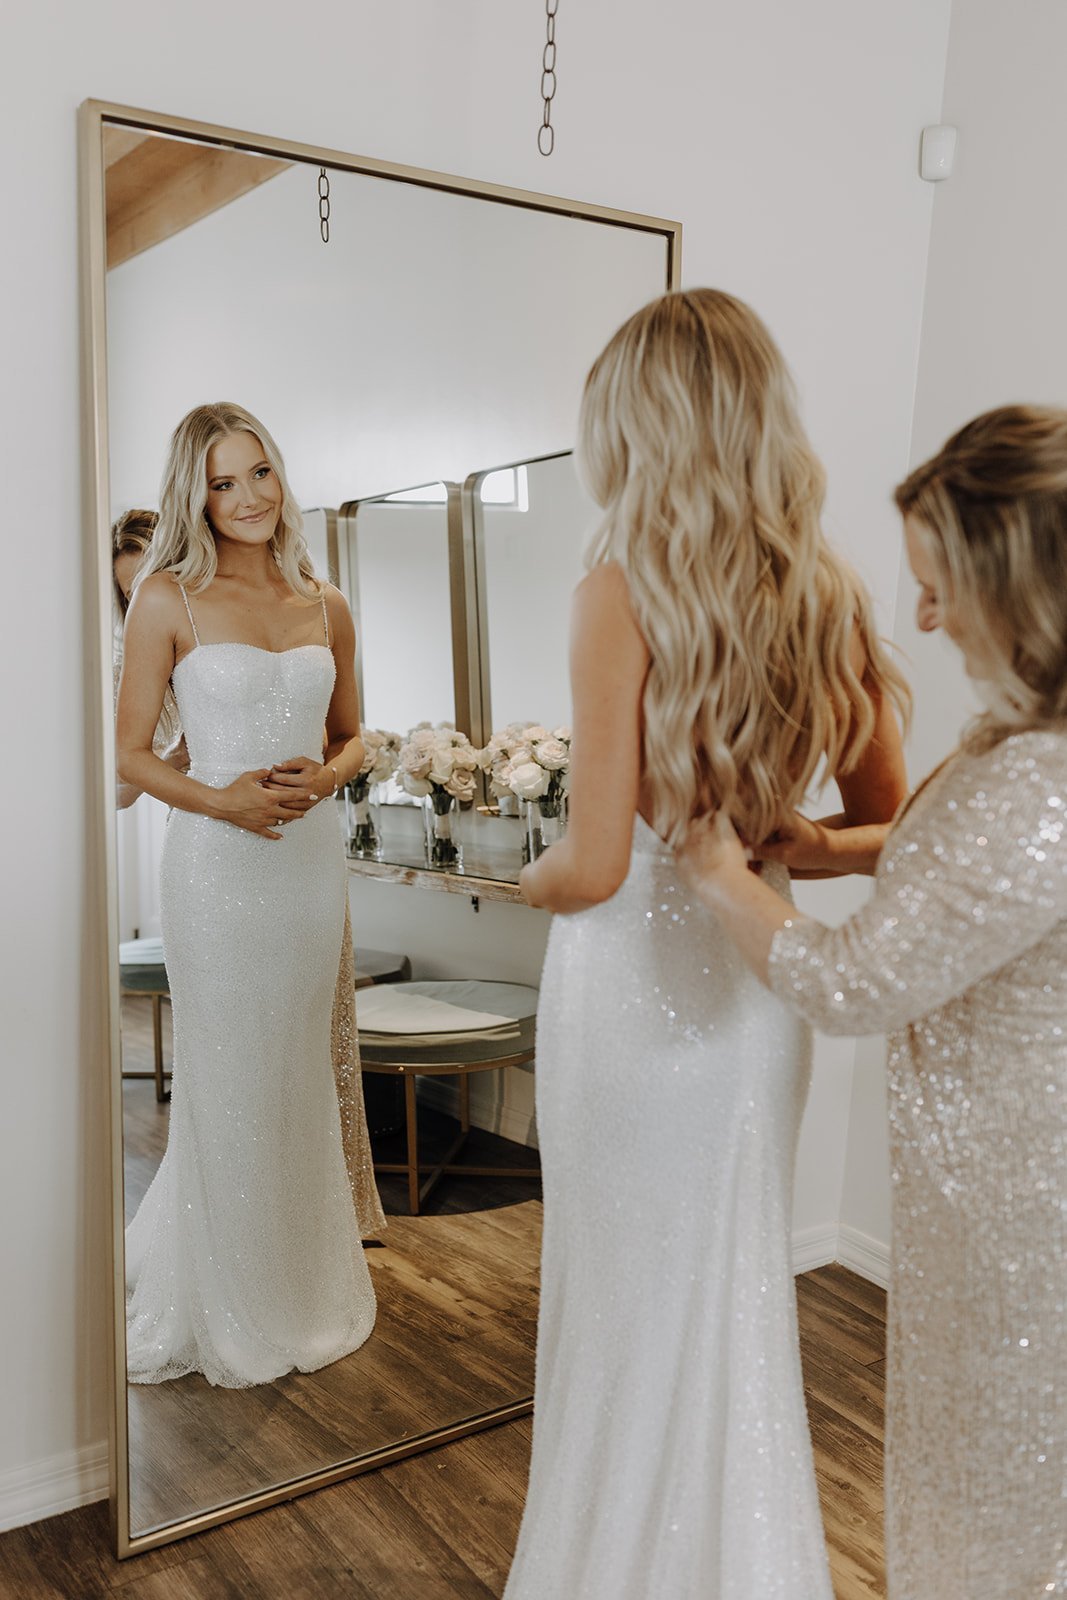 Bride smiling in the mirror while her mother zips her wedding dress